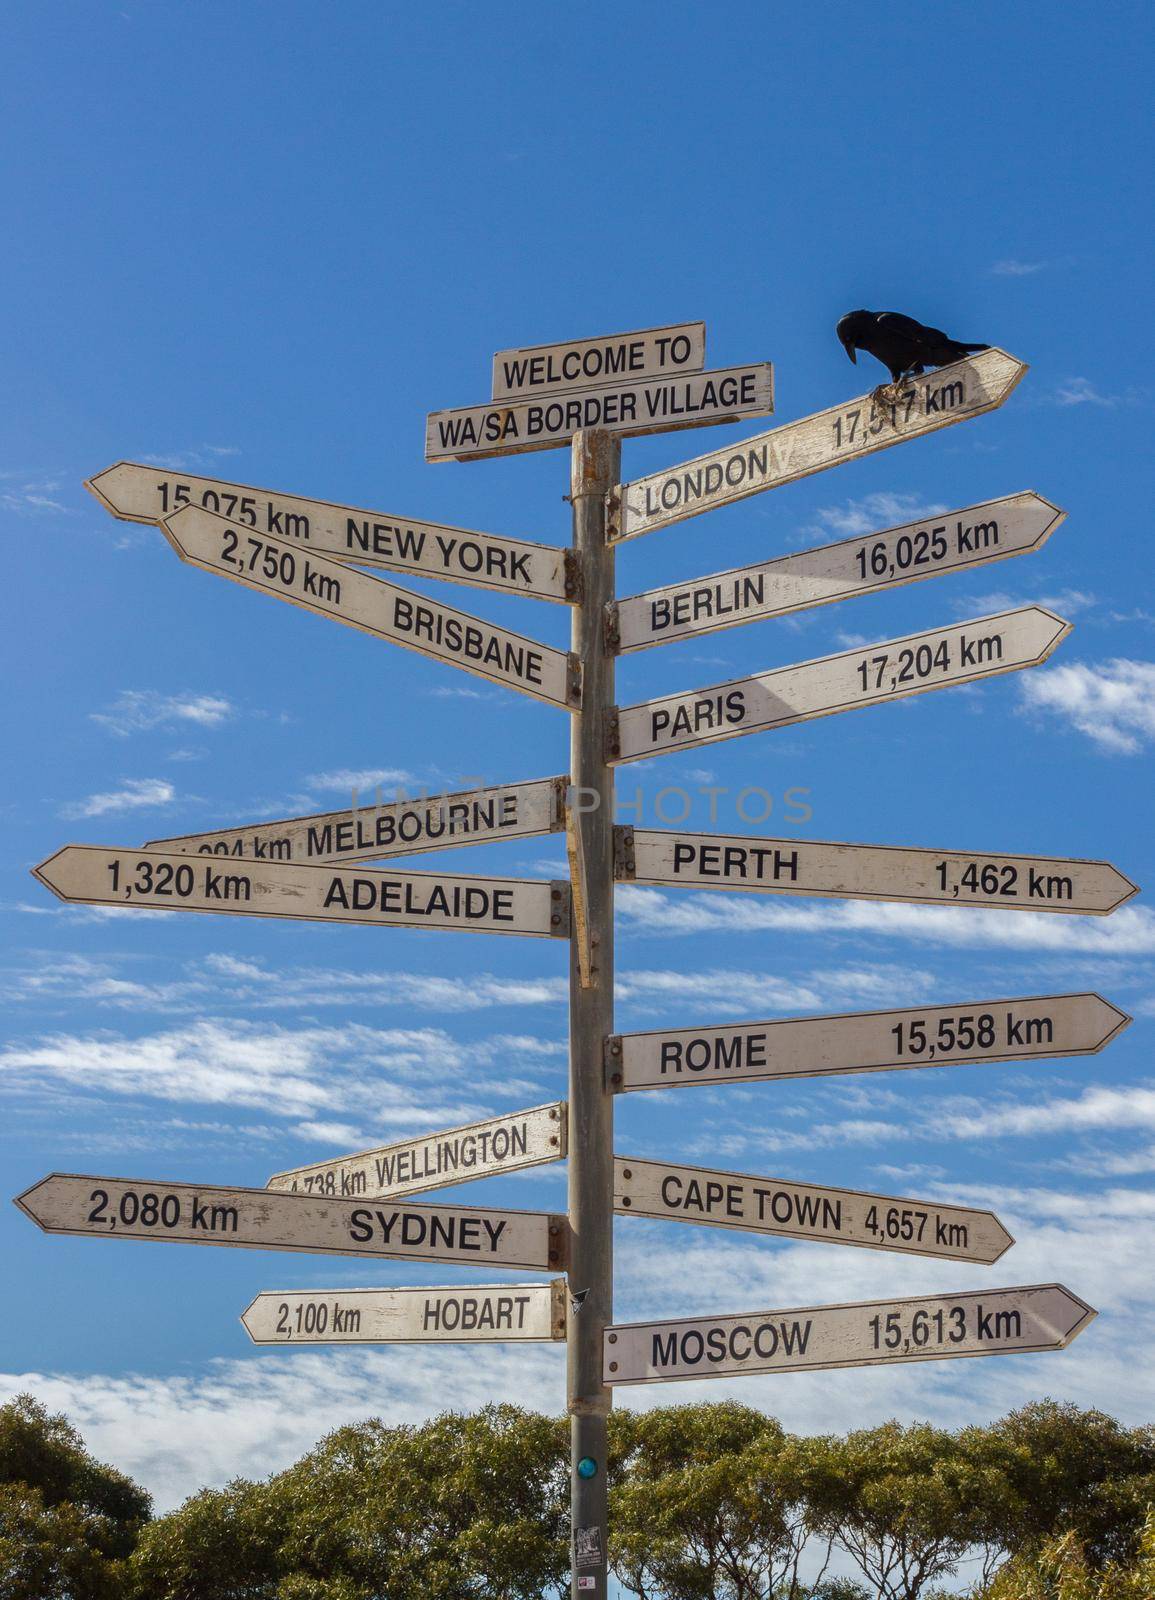 Crow sitting on a Milestone sign in the Nullabor dessert, Australia by bettercallcurry